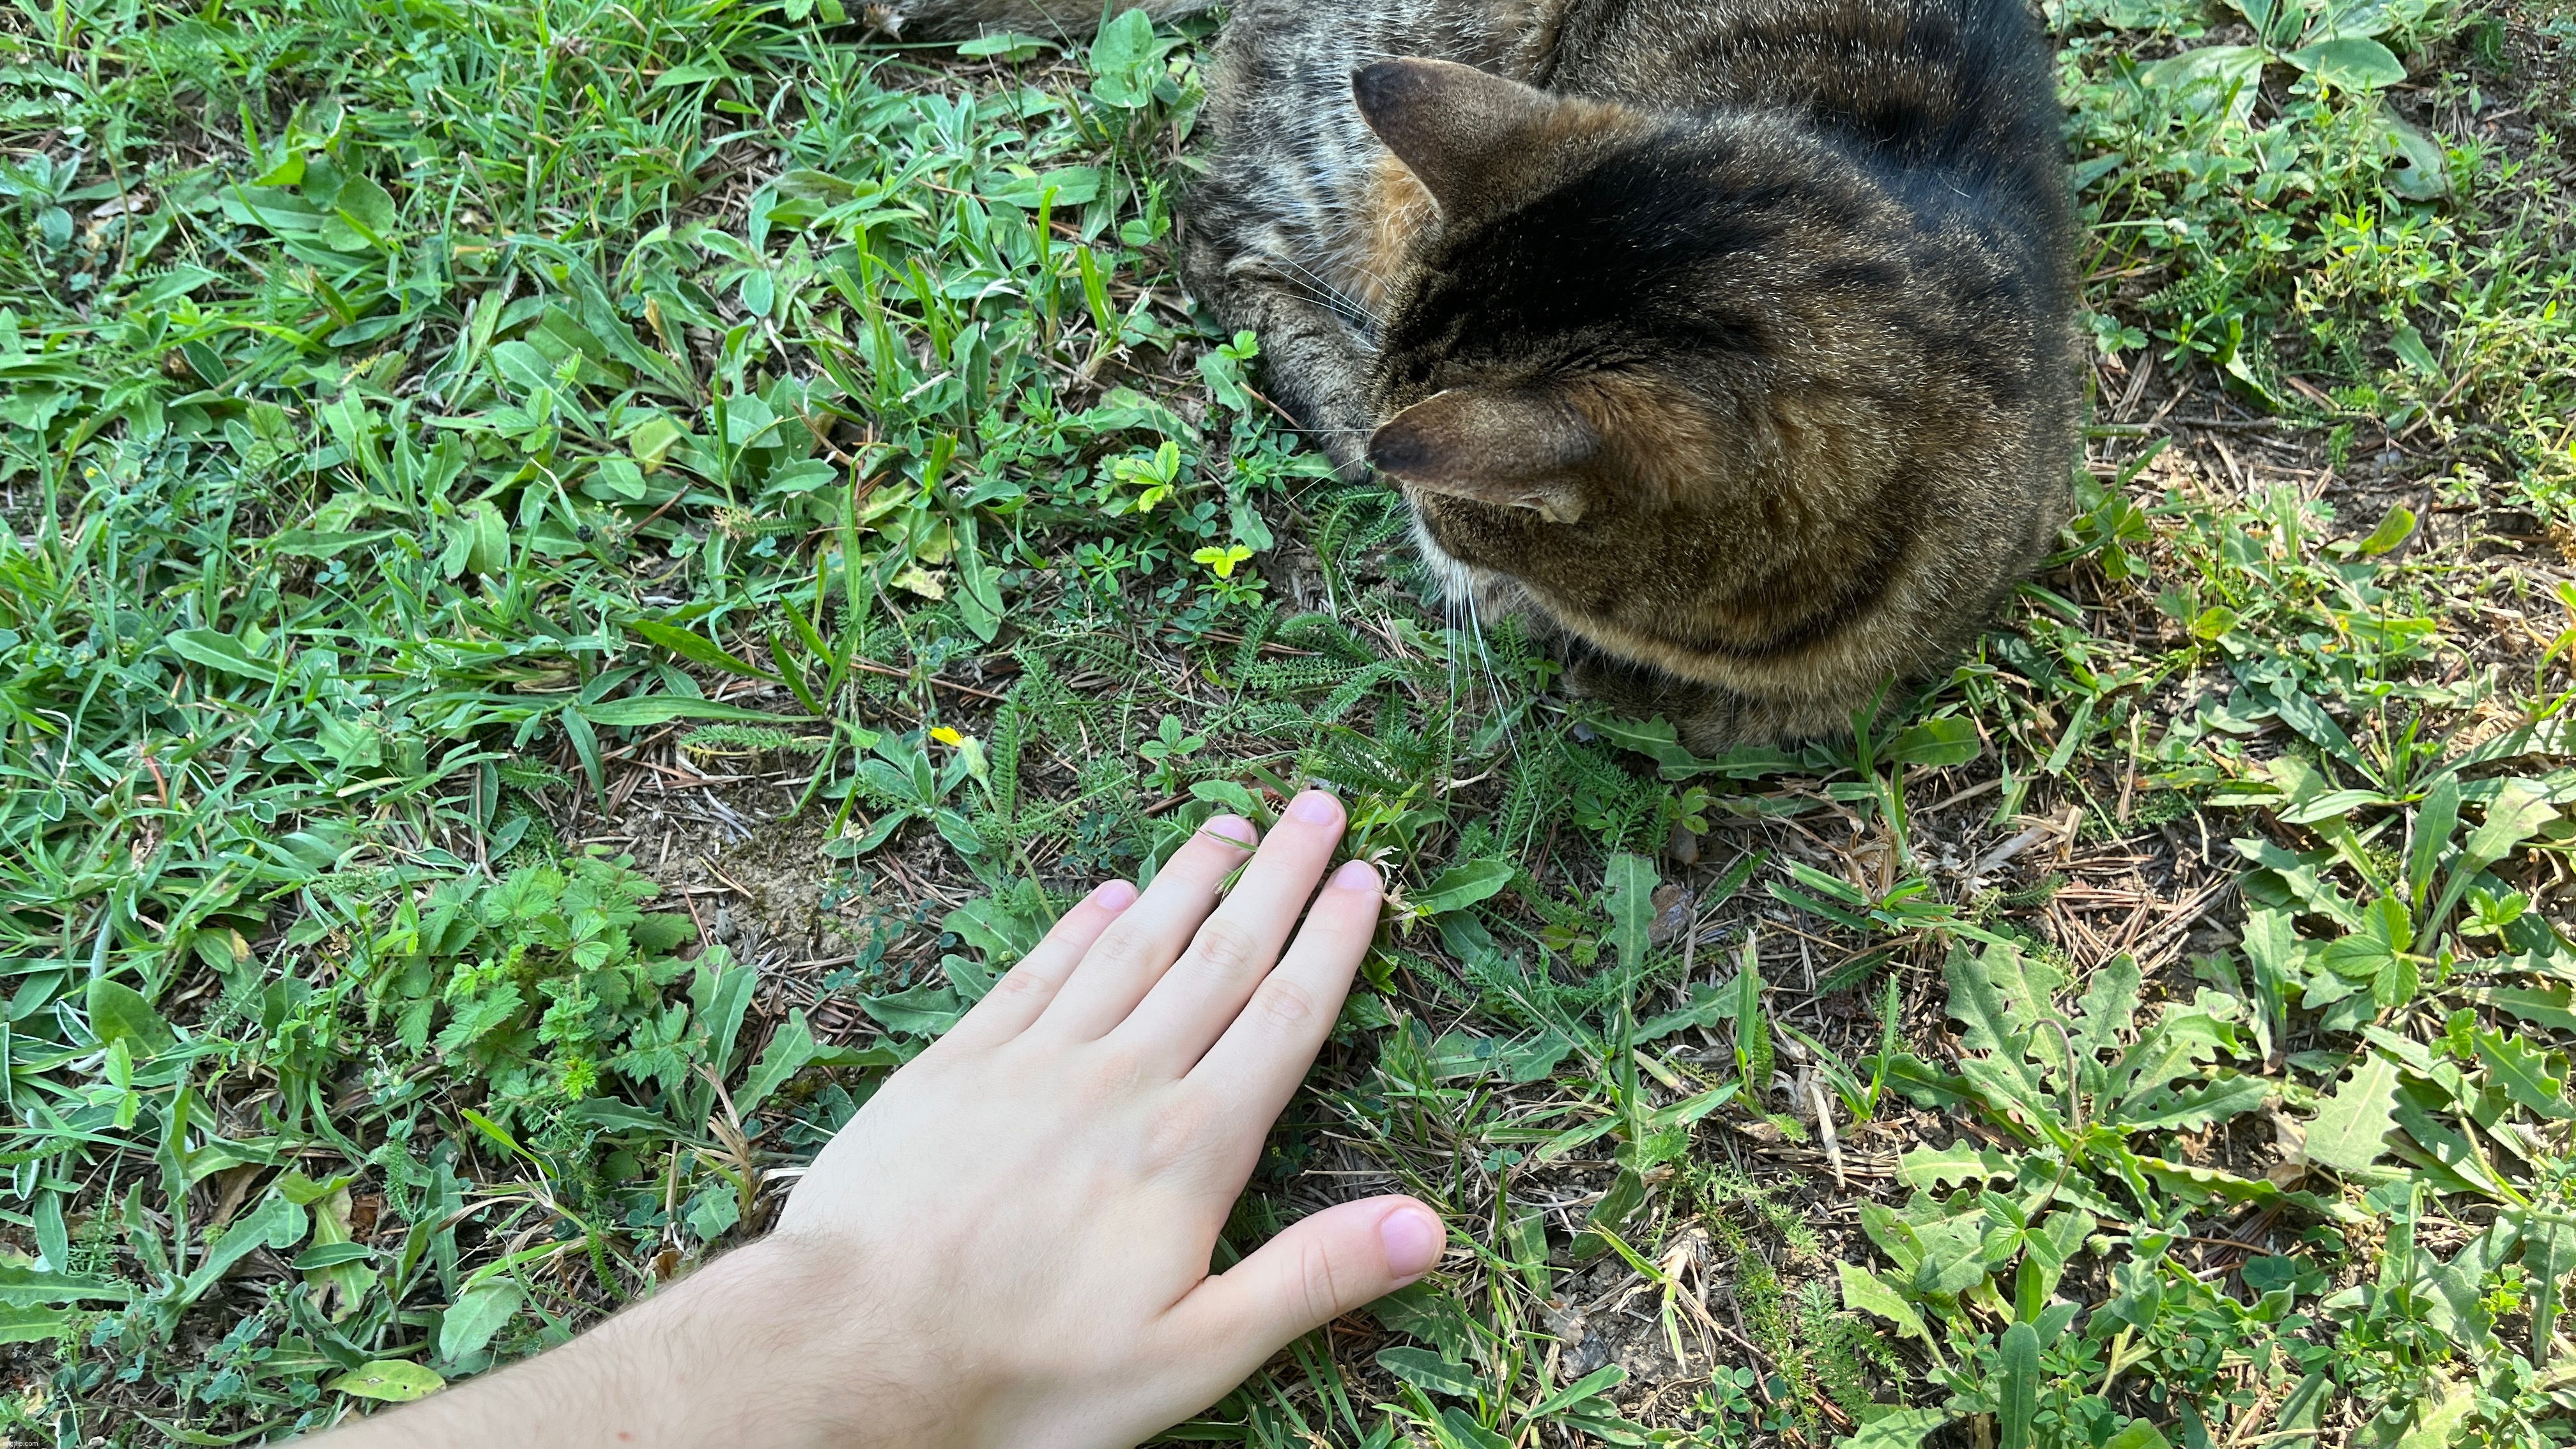 me touching grass + my cat | image tagged in share your own photos,share your photos,cats,touching grass,touch grass | made w/ Imgflip meme maker